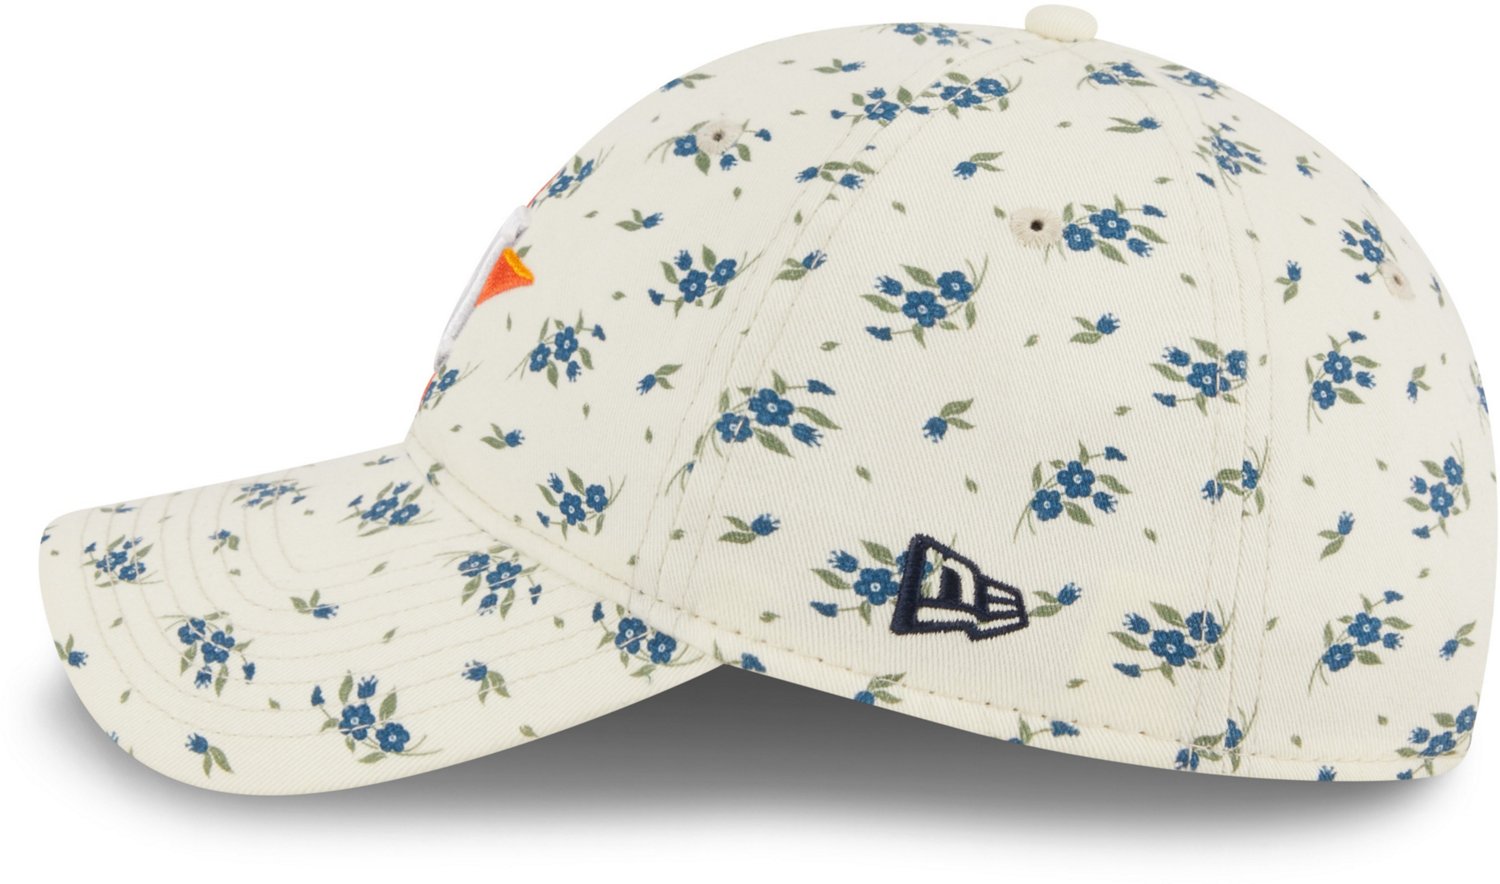 Los Angeles Dodgers SIDE-BLOOM Royal Fitted Hat by New Era